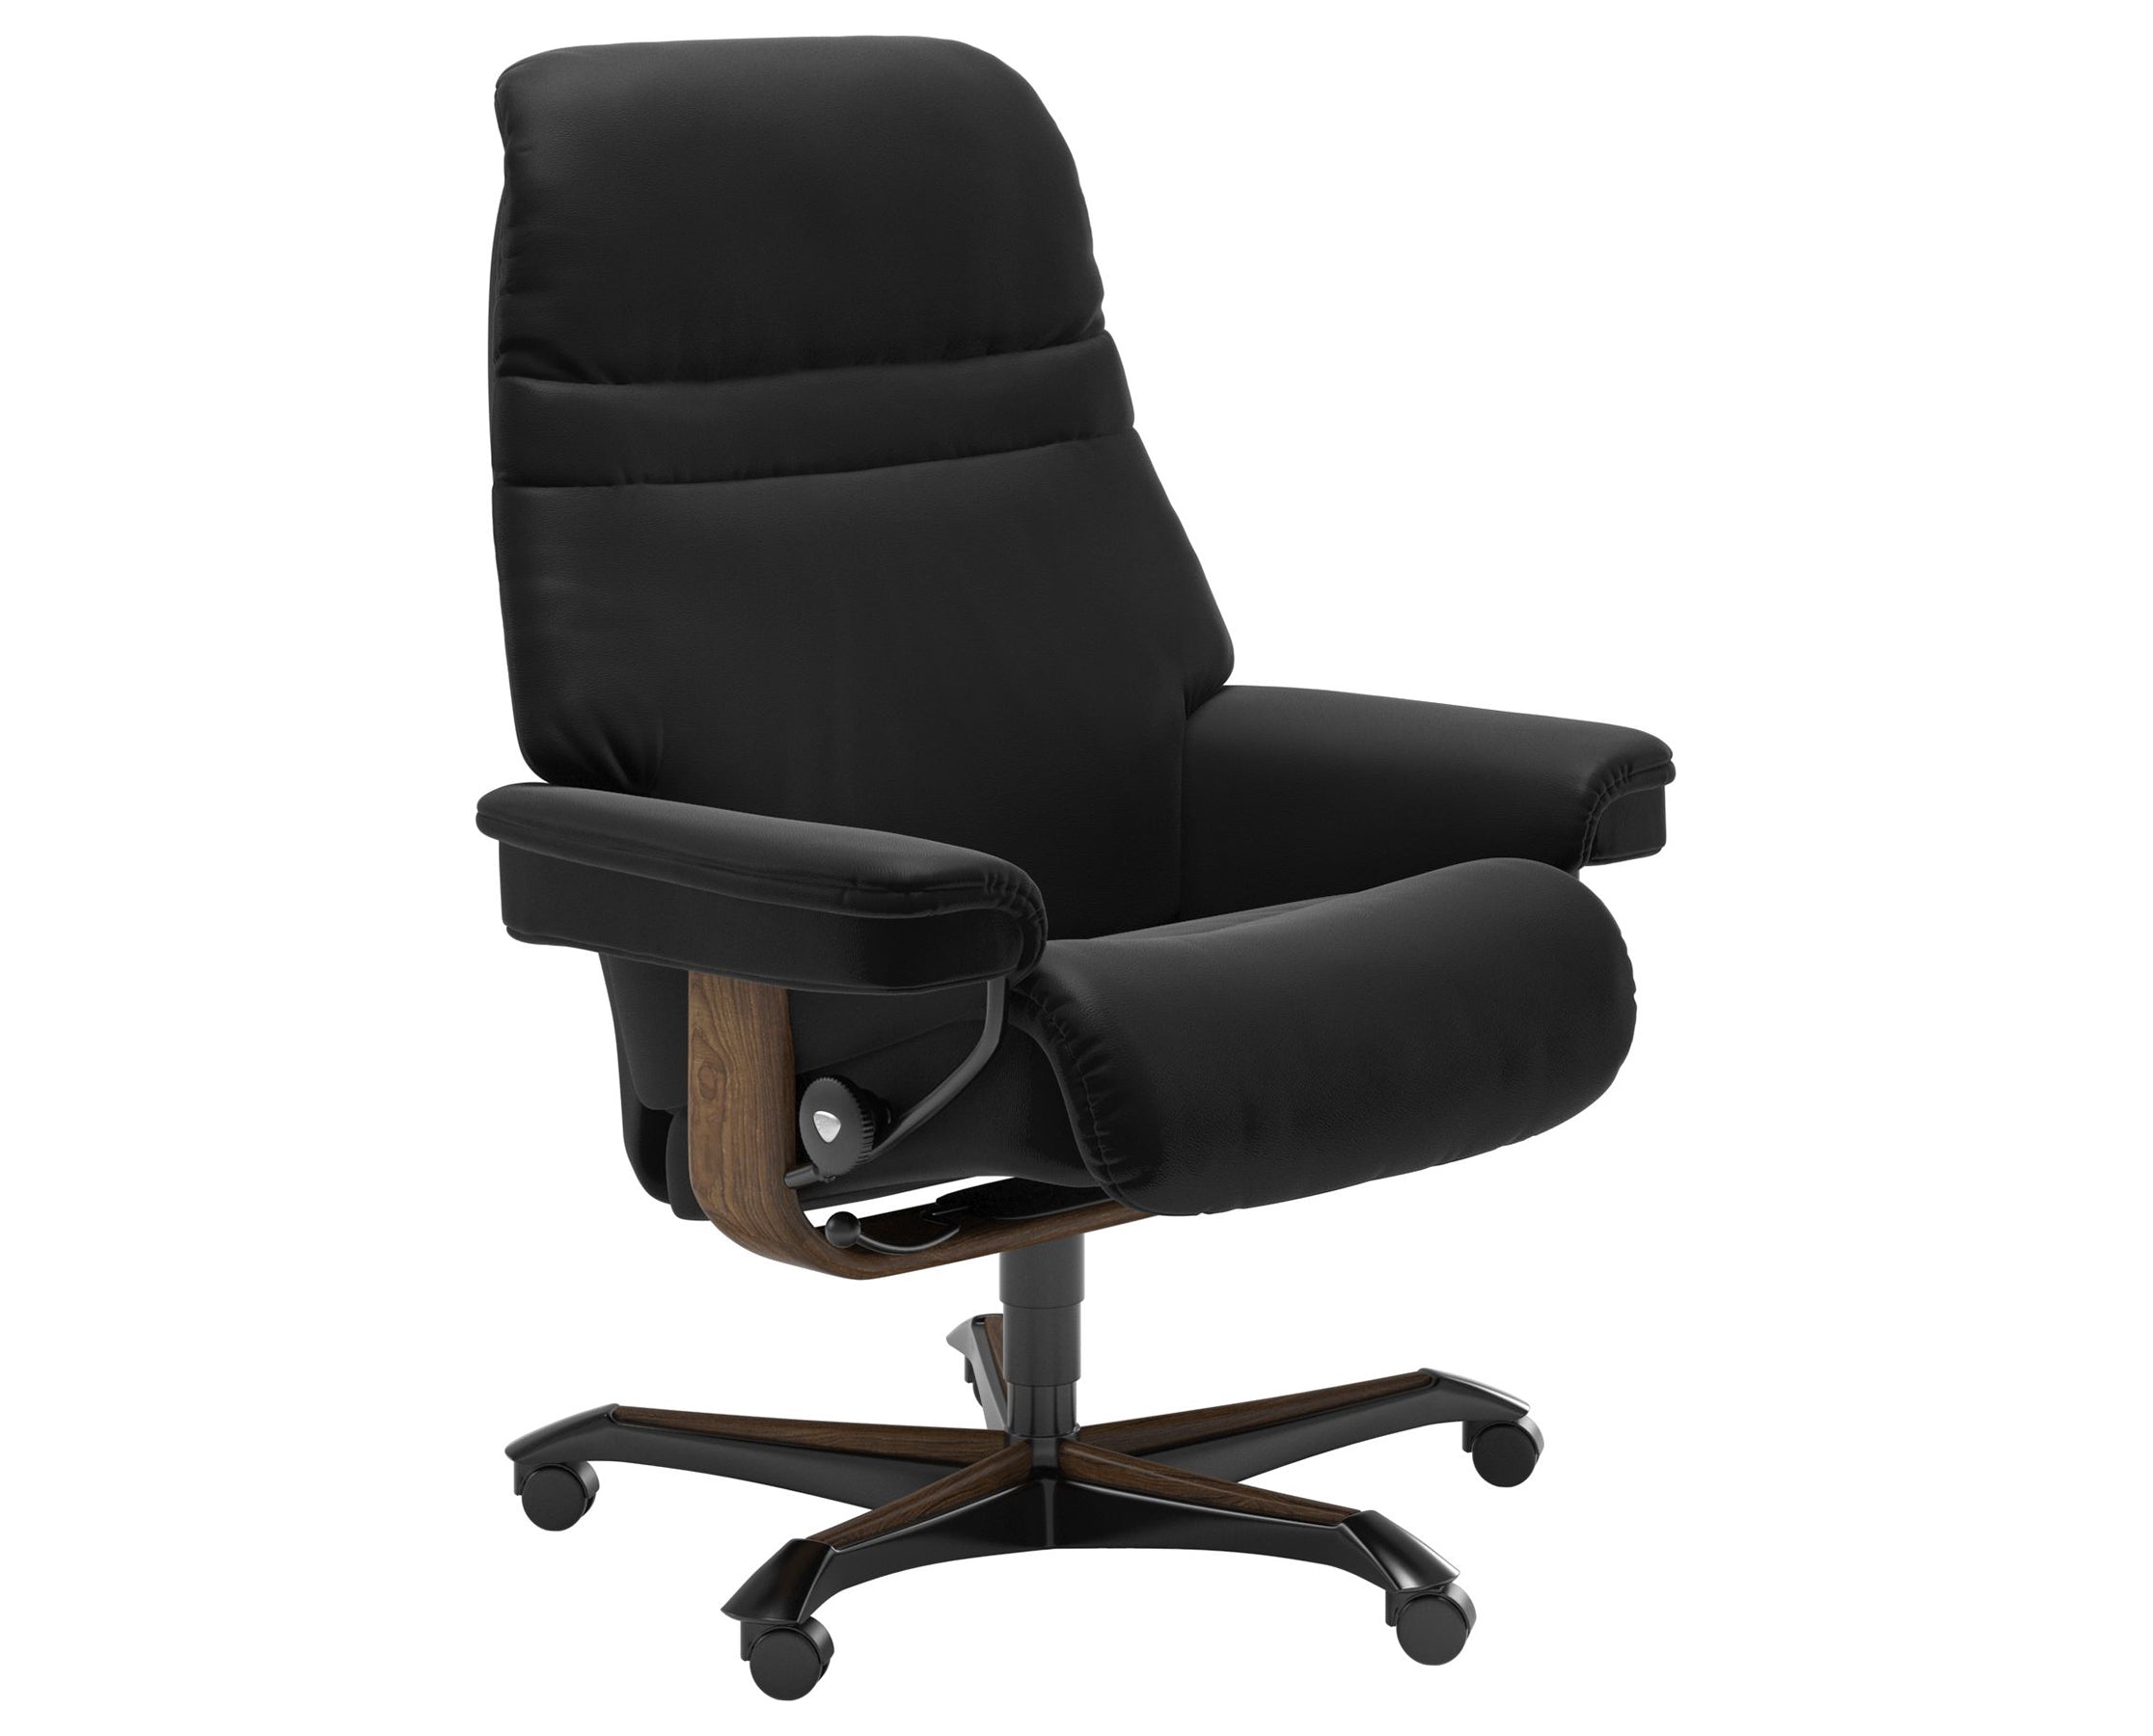 Paloma Leather Black M and Teak Base | Stressless Sunrise Home Office Chair | Valley Ridge Furniture